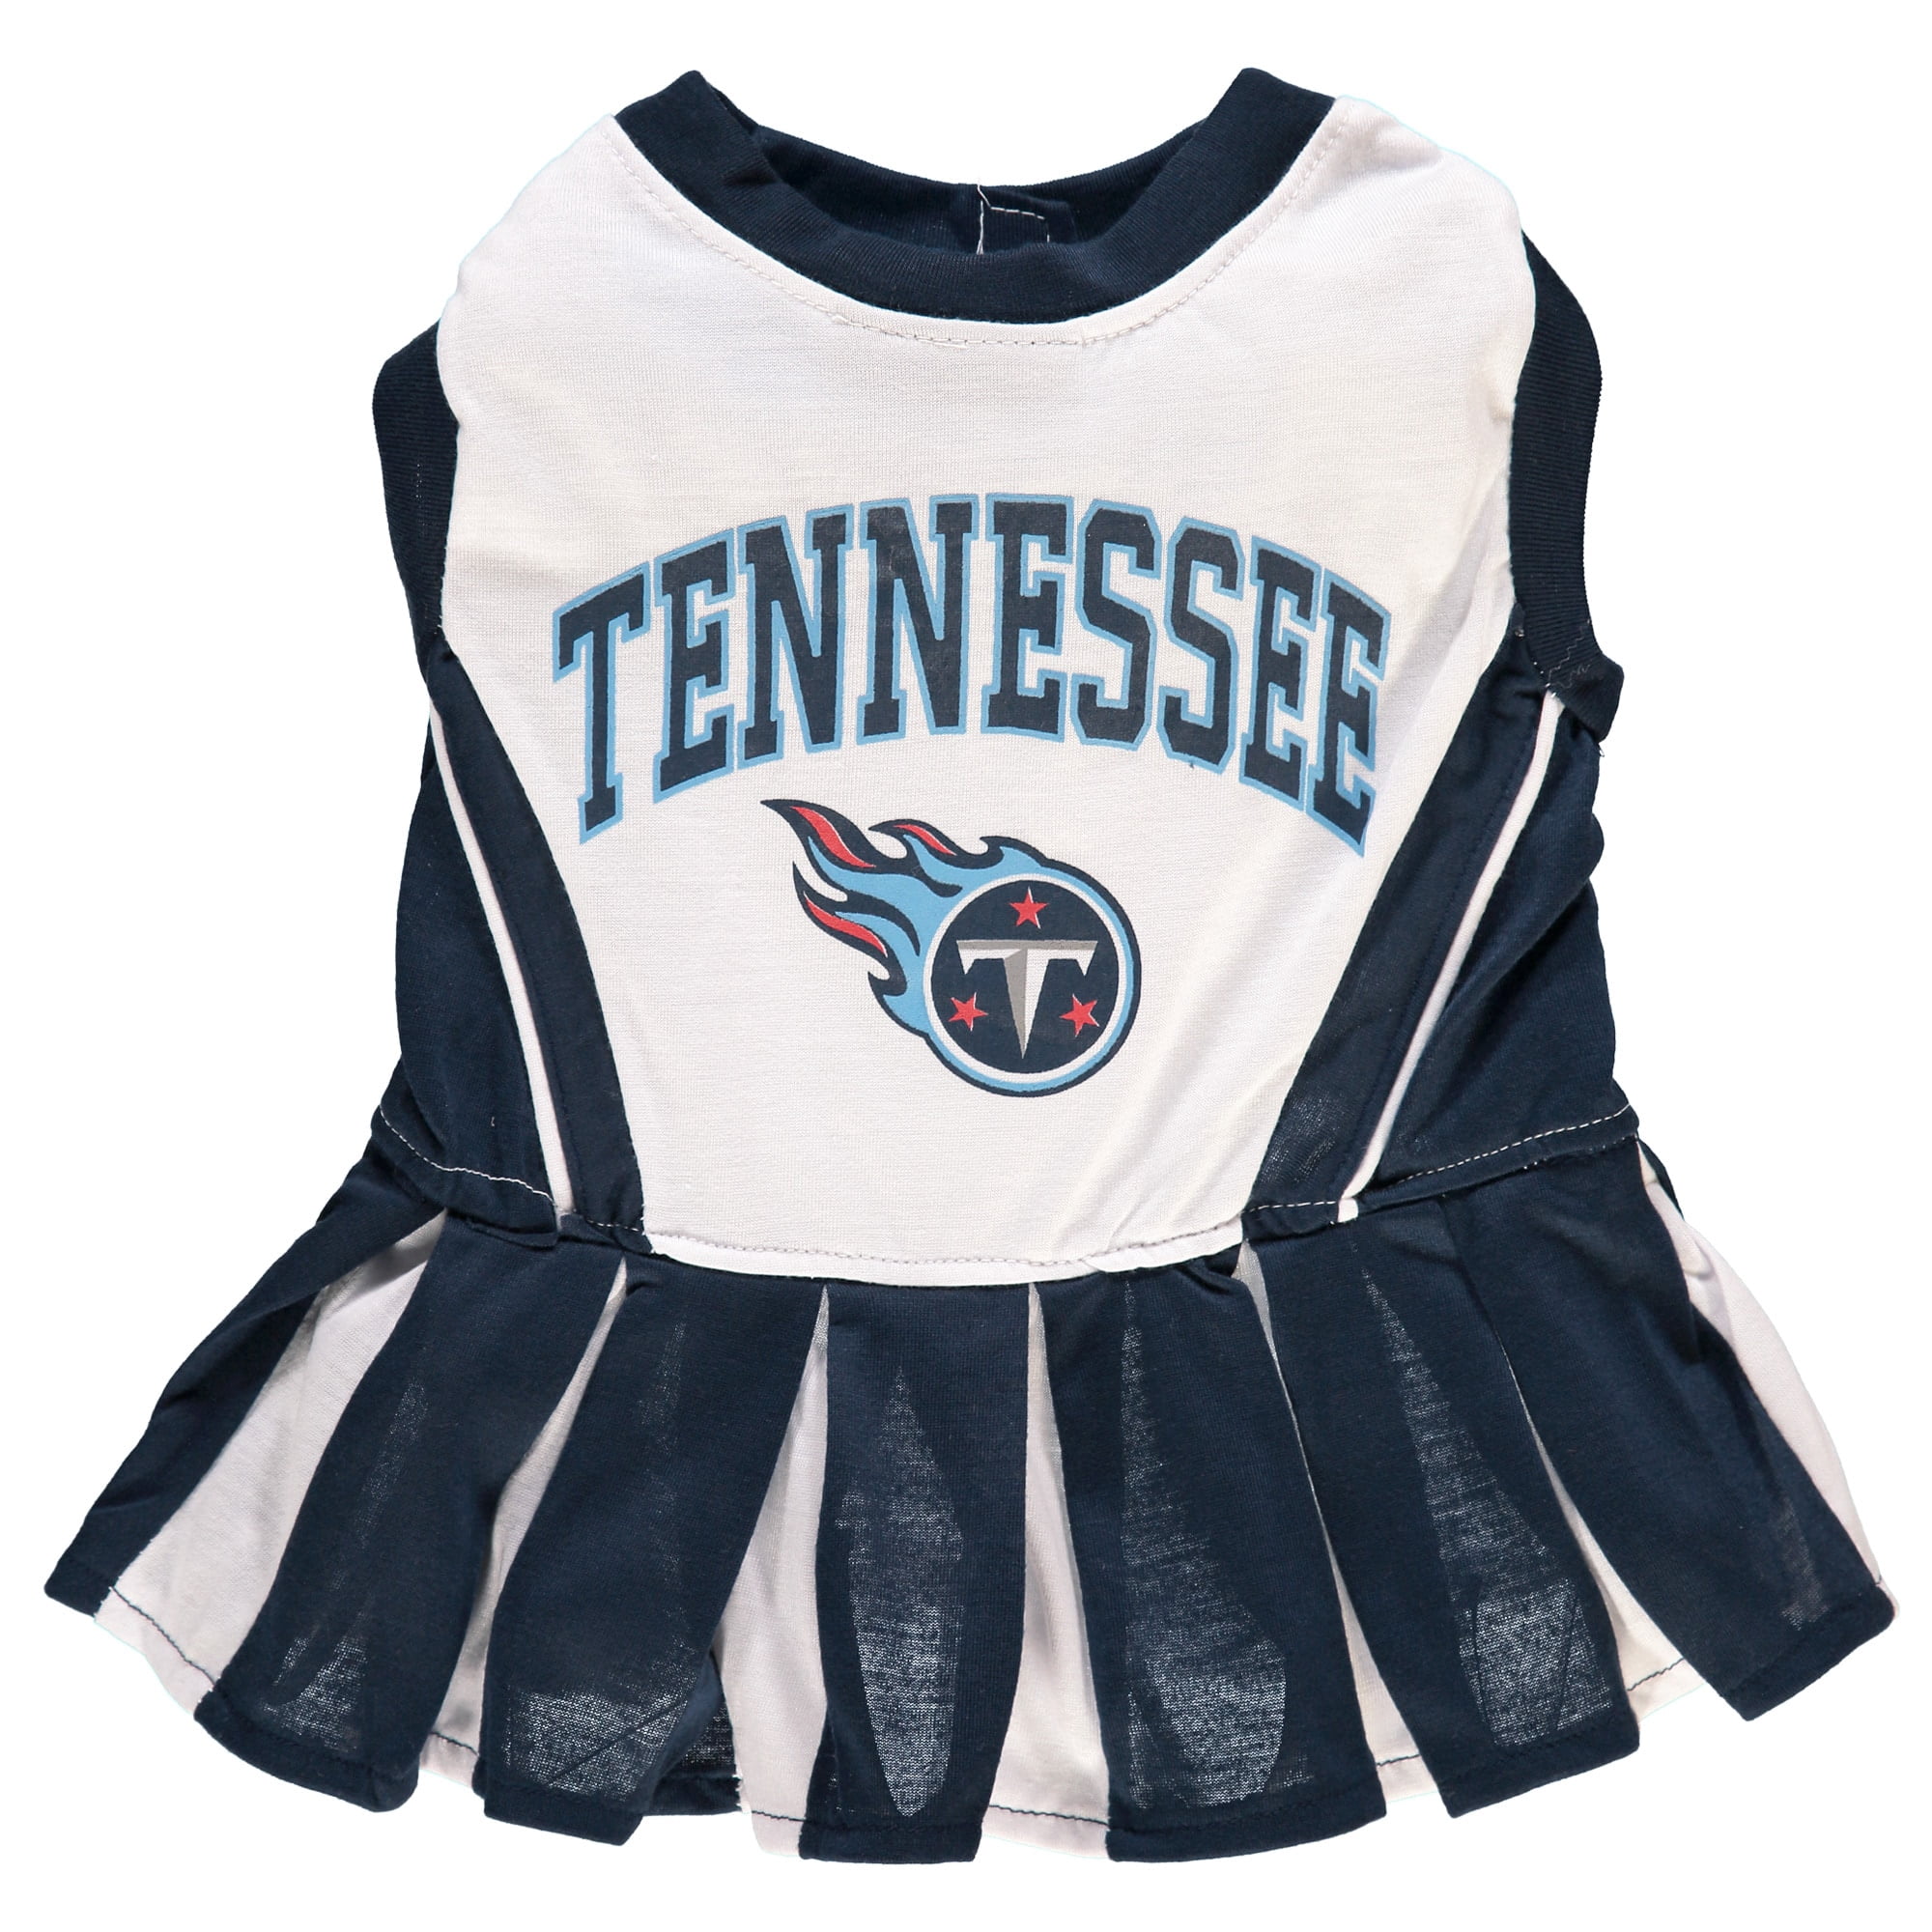 : Pets First Dallas Cowboys NFL Cheerleader Dress For